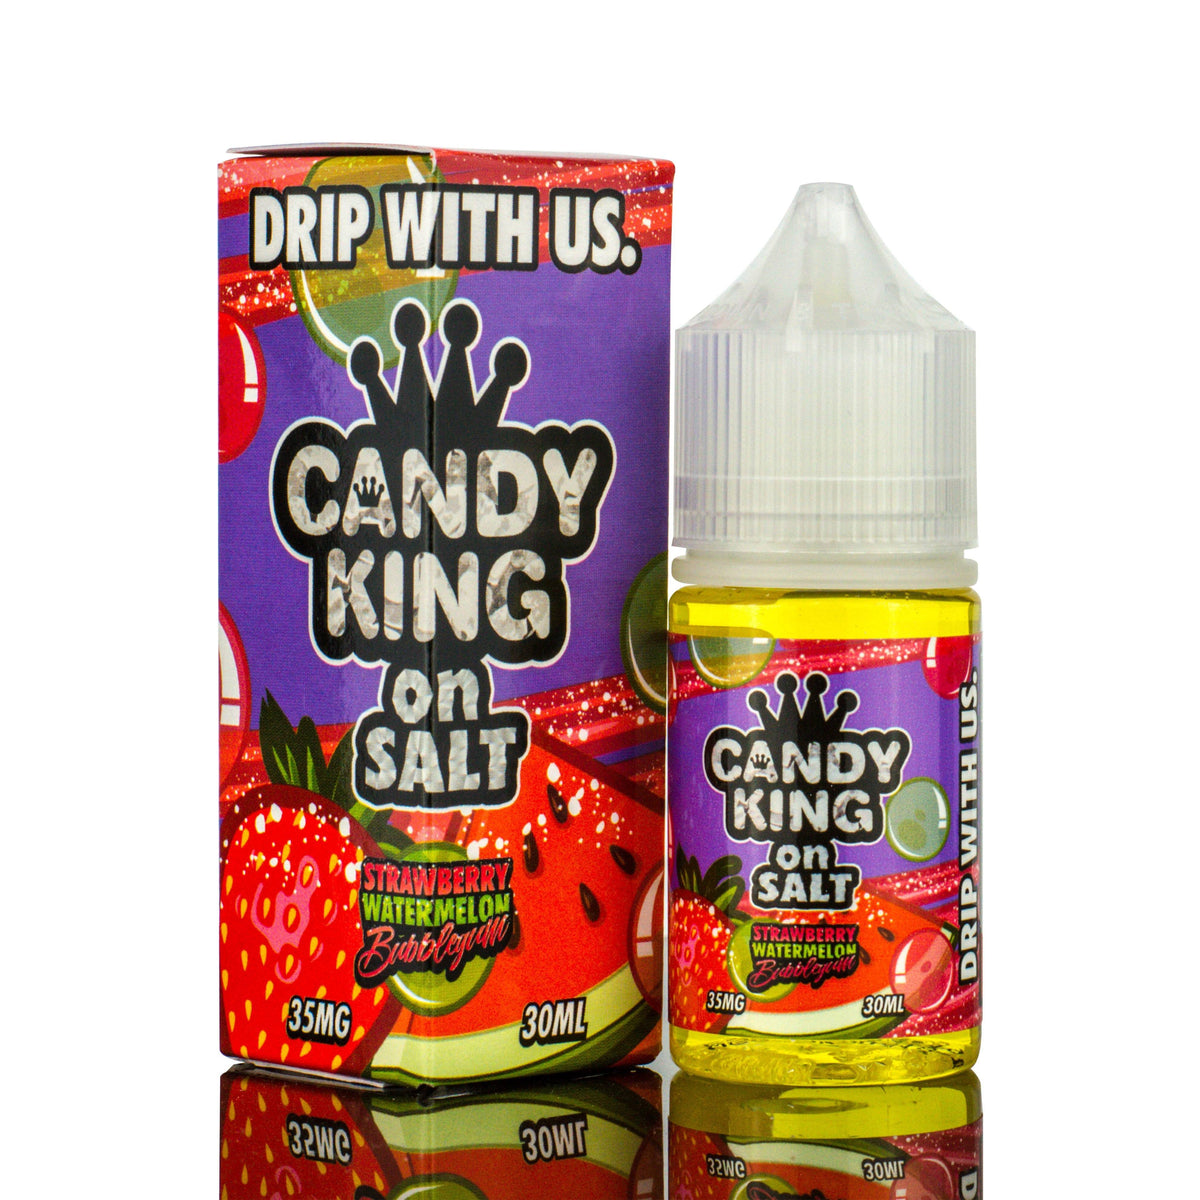 Strawberry Watermelon Bubblegum by Candy King on Salt Series 30mL with Packaging